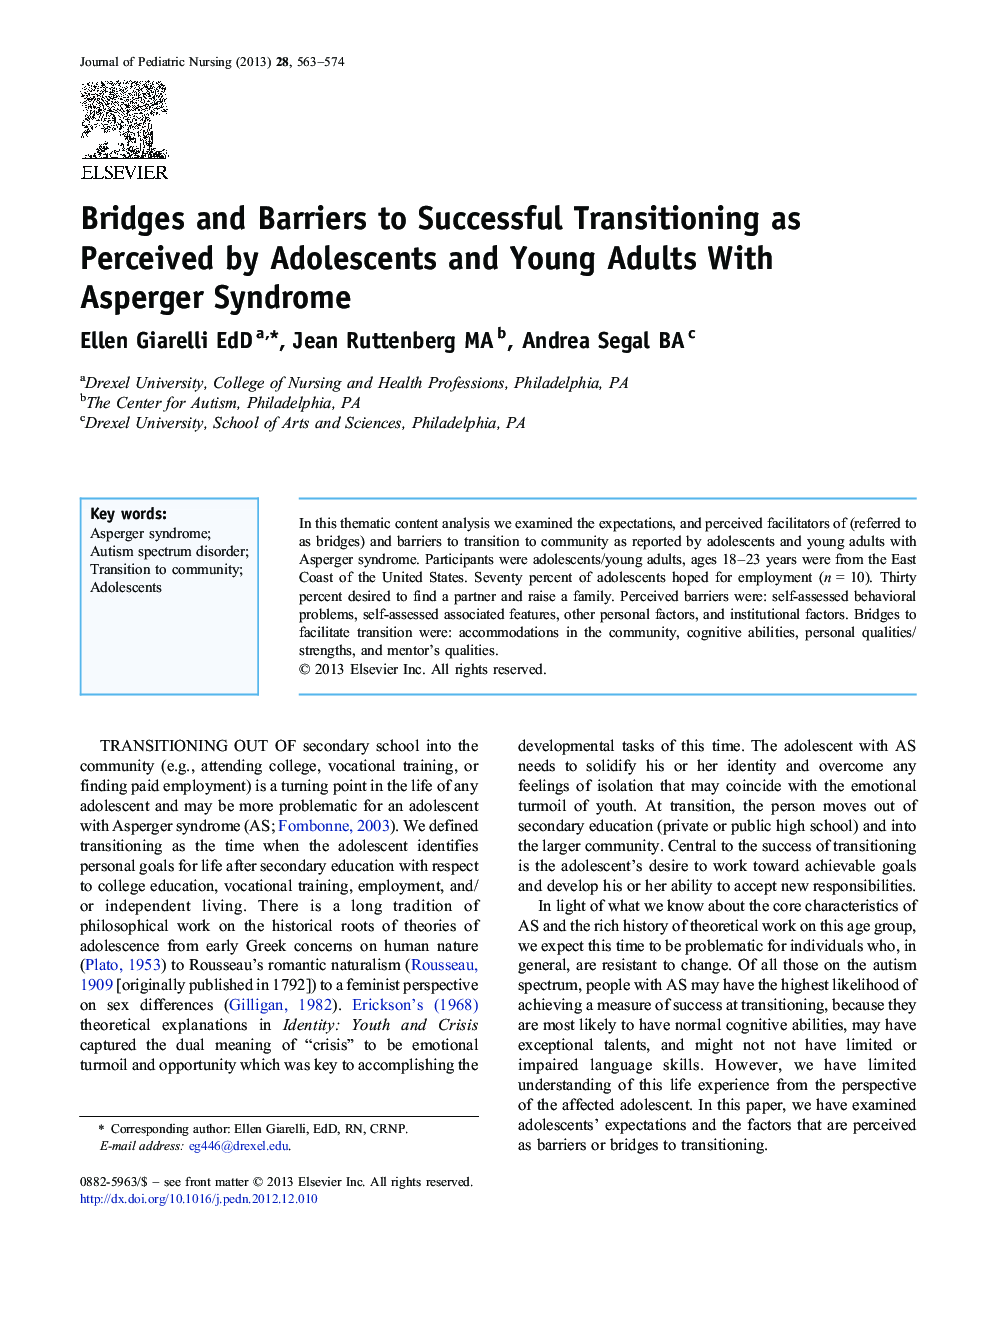 Bridges and Barriers to Successful Transitioning as Perceived by Adolescents and Young Adults With Asperger Syndrome